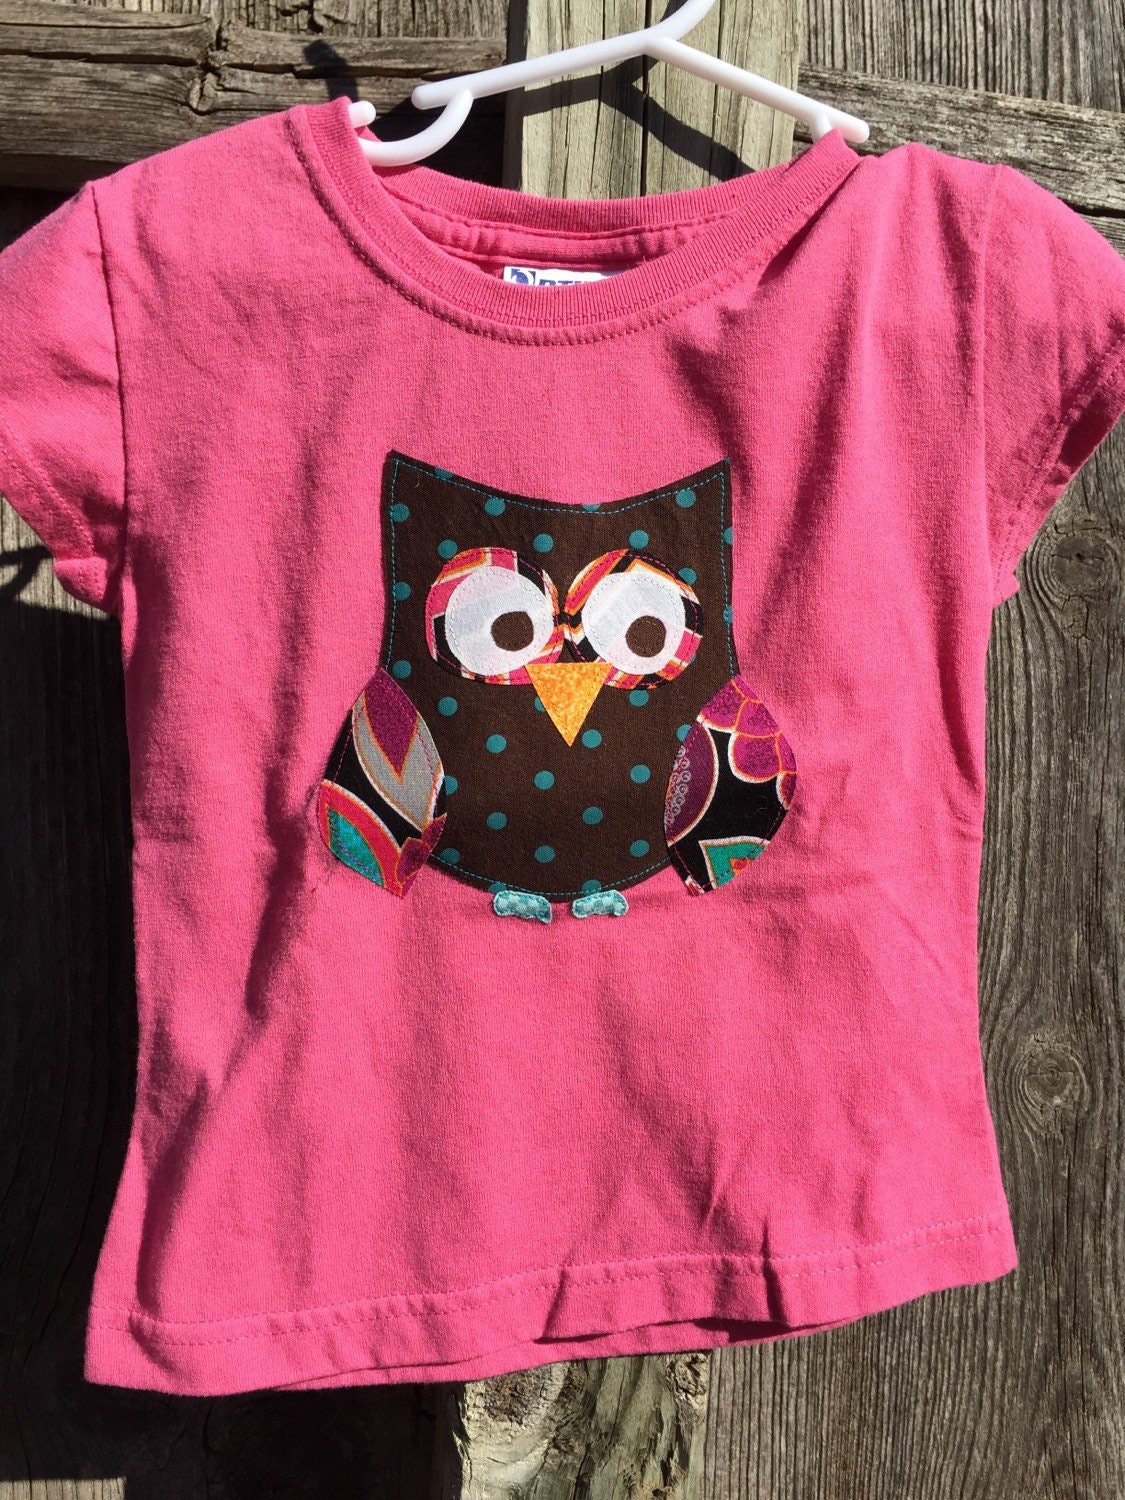 SALE Girl's Pink Owl Shirt Size 4 by SwankyPankyDesigns on Etsy